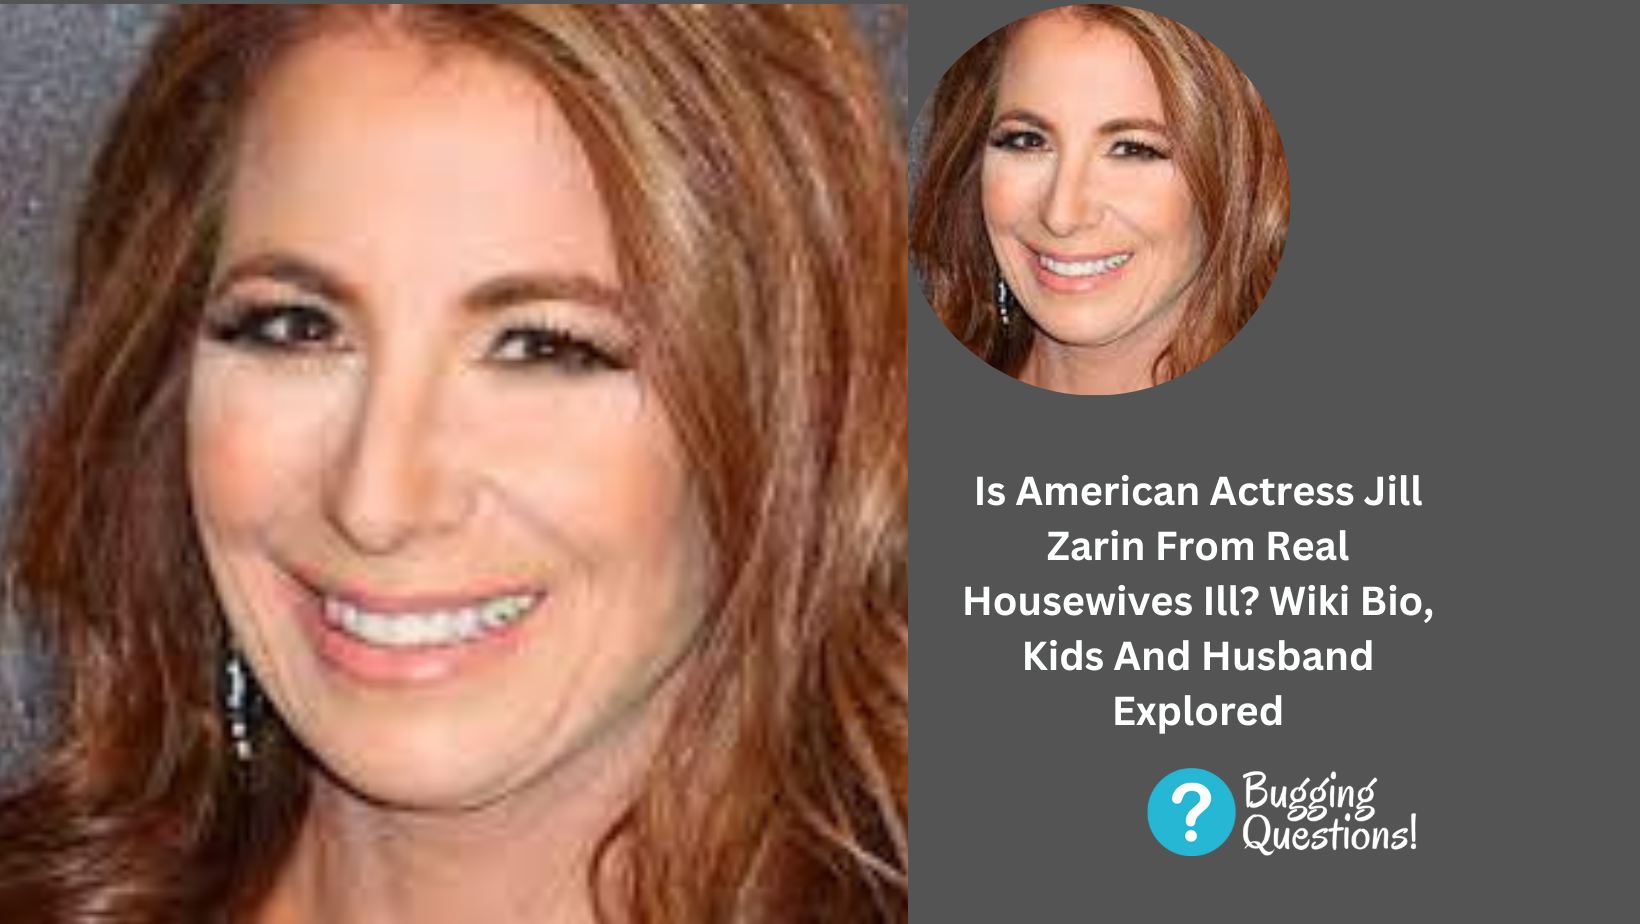 Is American Actress Jill Zarin From Real Housewives Ill? Wiki Bio, Kids And Husband Explored